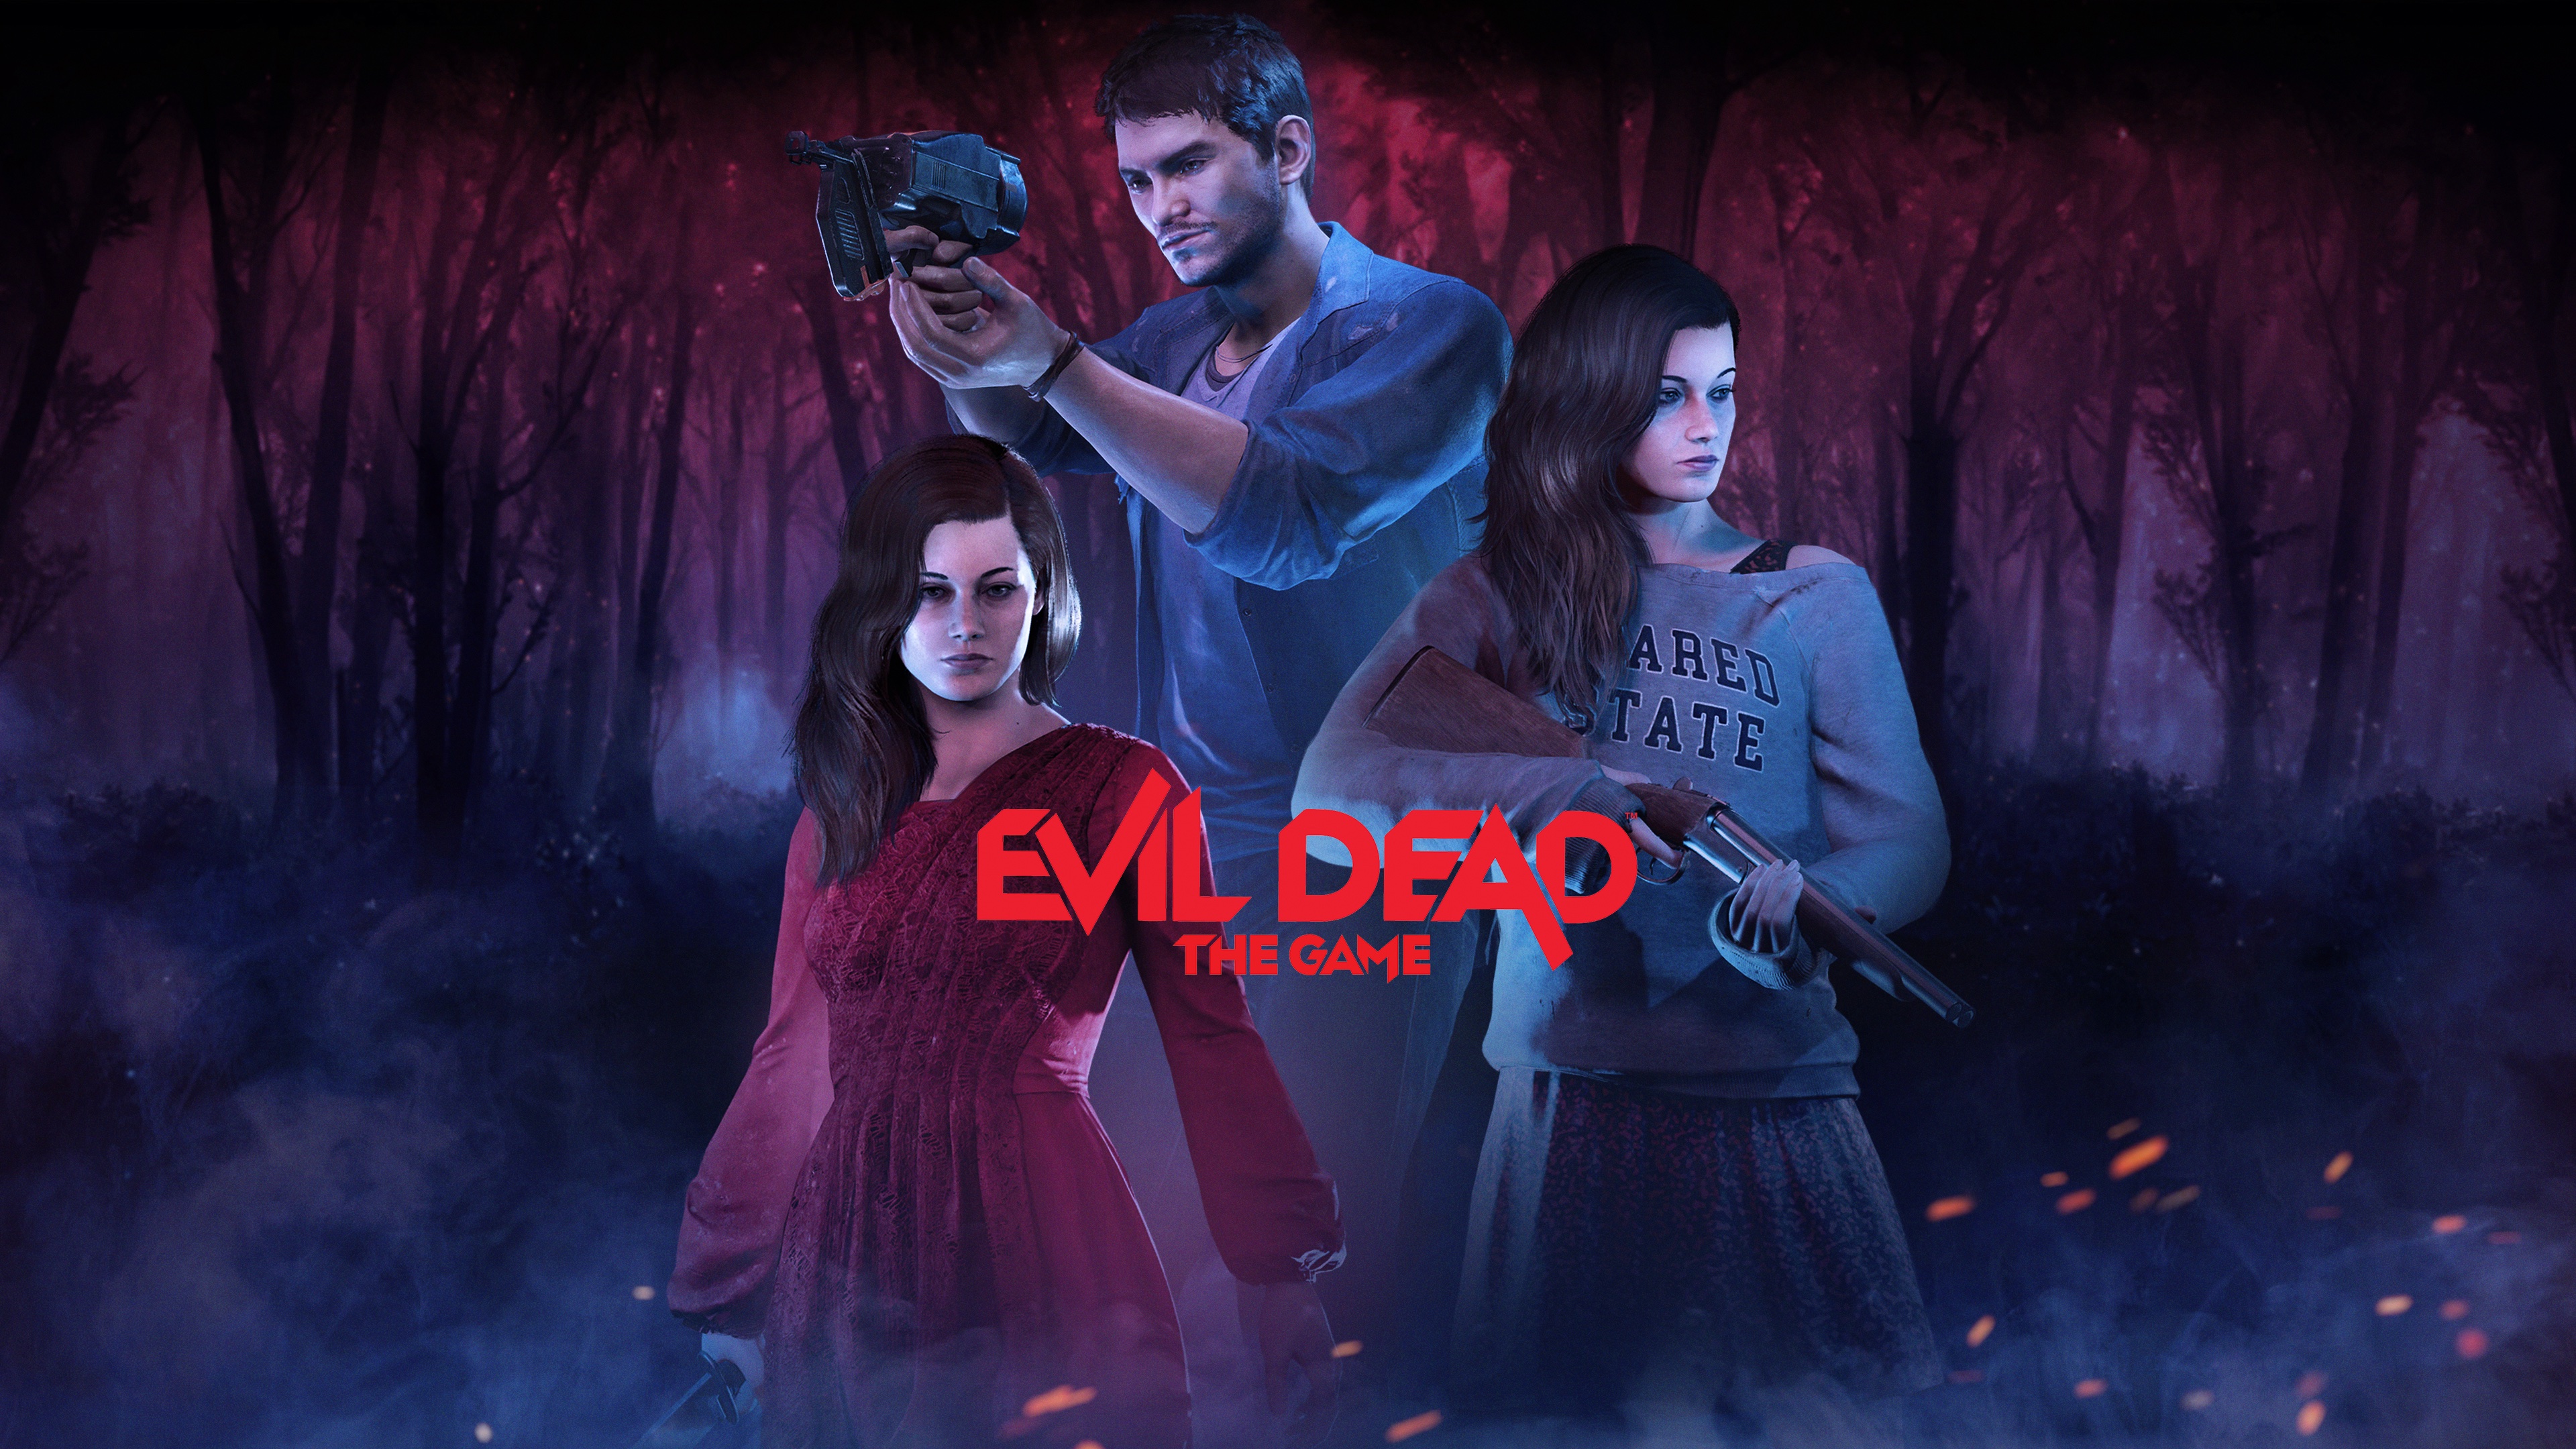 EvilDeadTheGame on X: 🔴 LIVE NOW: Evil Dead: The Game Update Stream  Preview! @ReAnimateHer_ @SledgeTwitch @kittierbb and @SlashNCast have  joined the team! 💥 Collectors Edition giveaway raffle! 🎤 Hosted by  @Sohinki and @